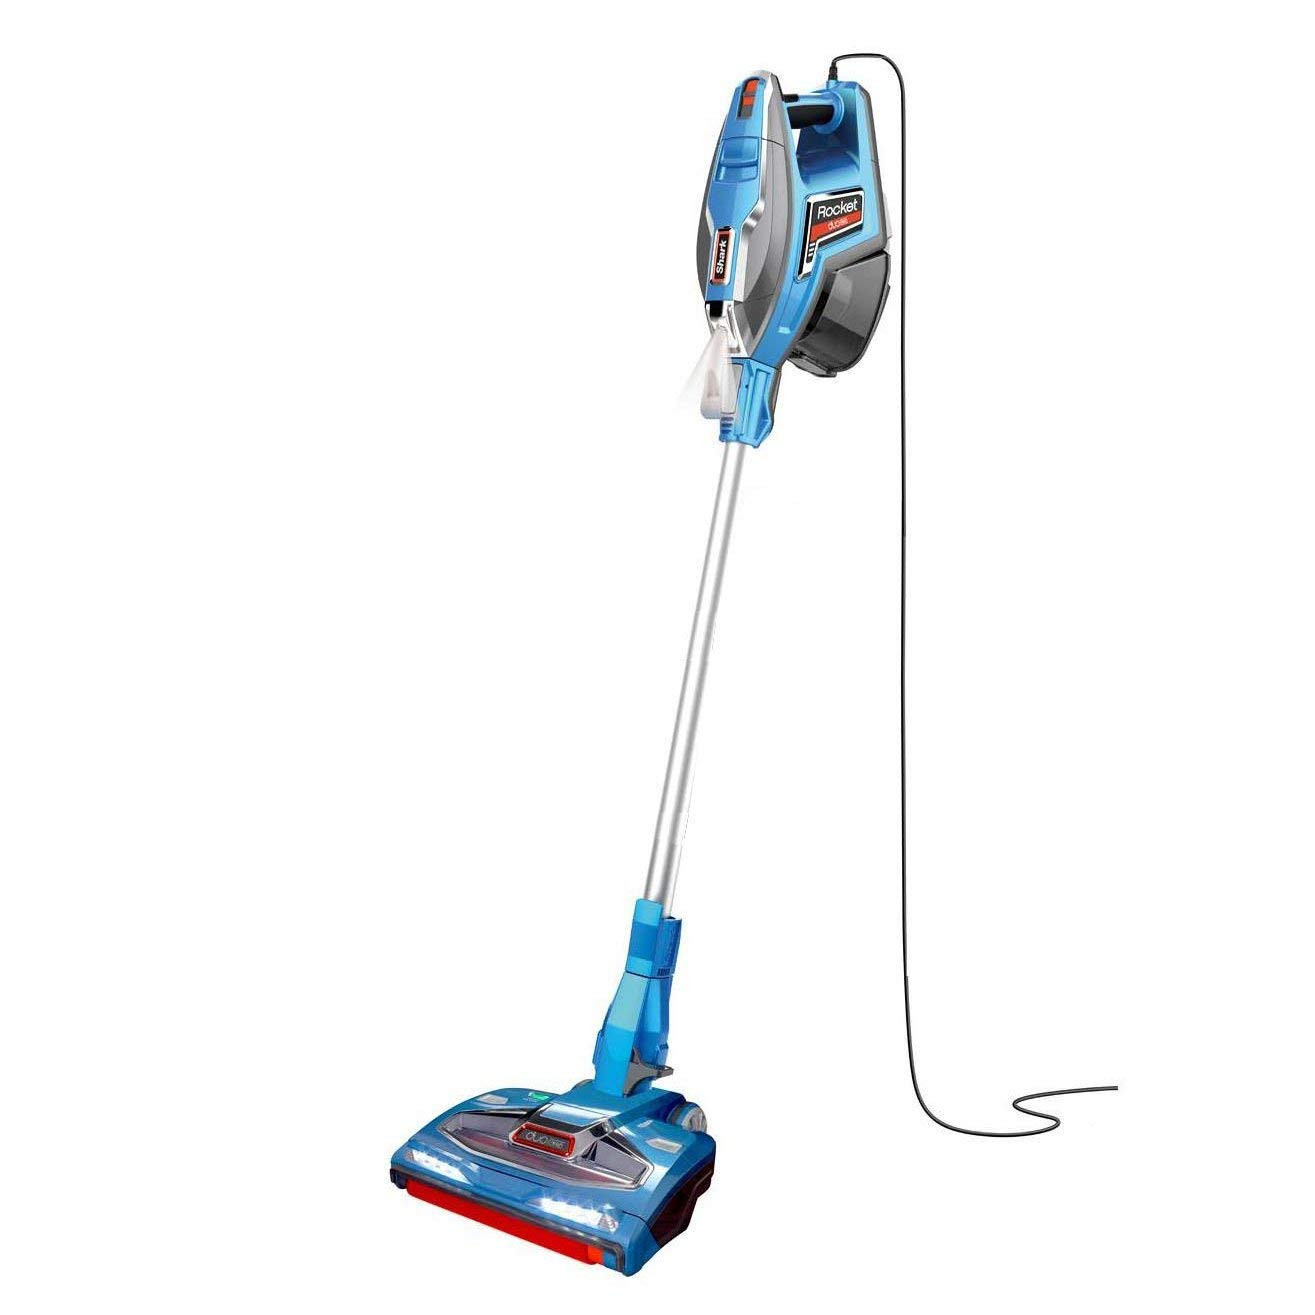 30 attractive Best Shark Vacuum for Pets and Hardwood Floors 2022 free download best shark vacuum for pets and hardwood floors of shark floor nailer www topsimages com intended for shark rocket complete vacuum with duoclean technology certified refurbished jpg 1315x1315